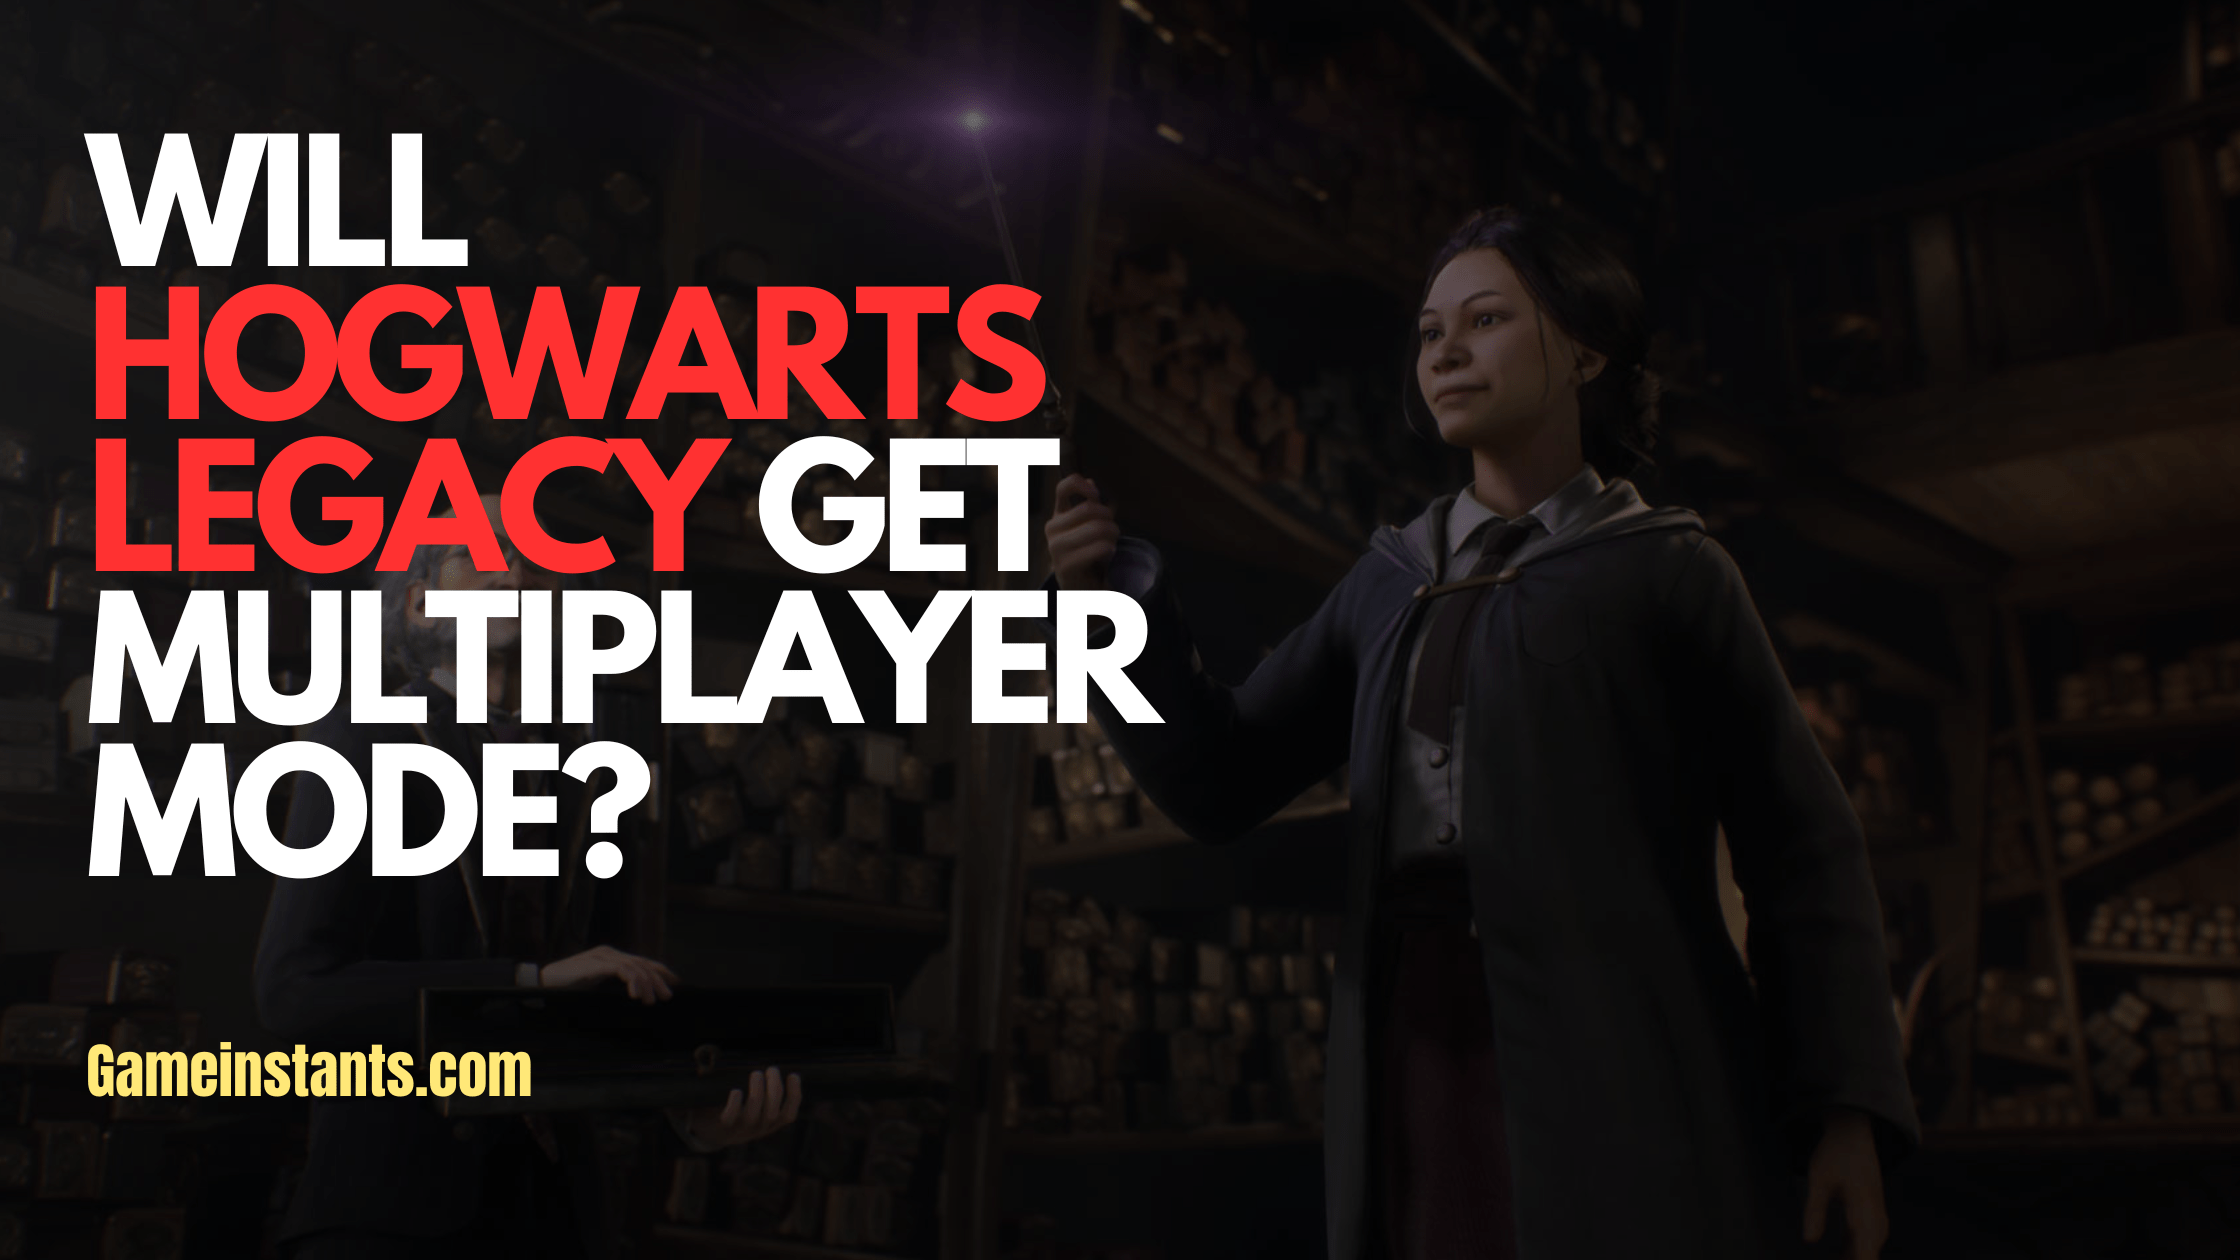 Will Hogwarts Legacy Get Multiplayer Mode